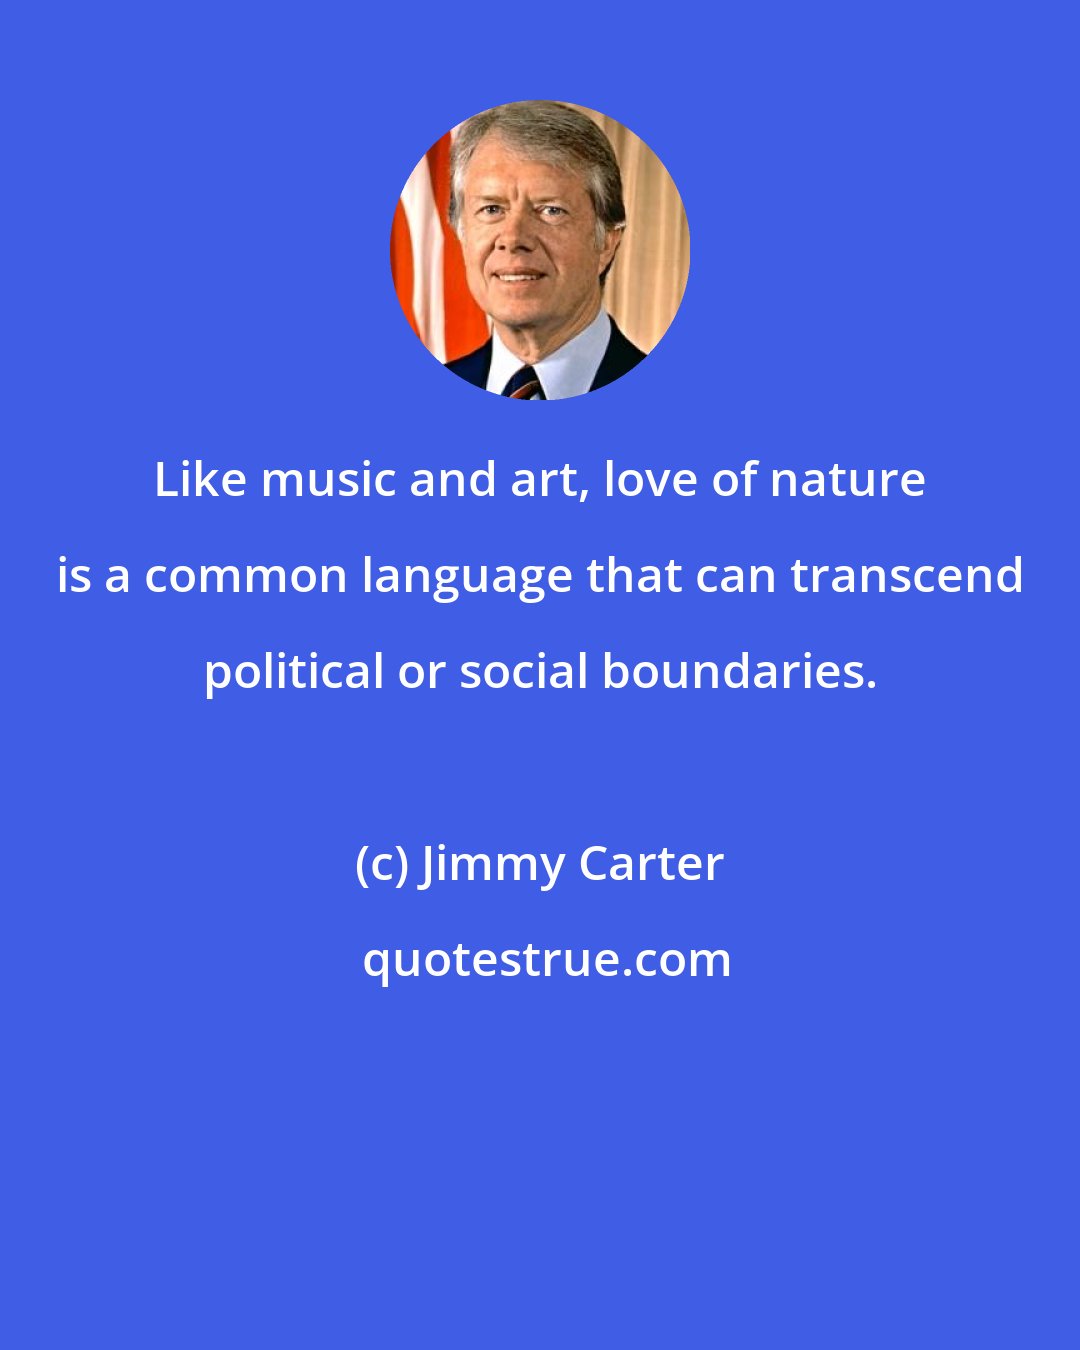 Jimmy Carter: Like music and art, love of nature is a common language that can transcend political or social boundaries.